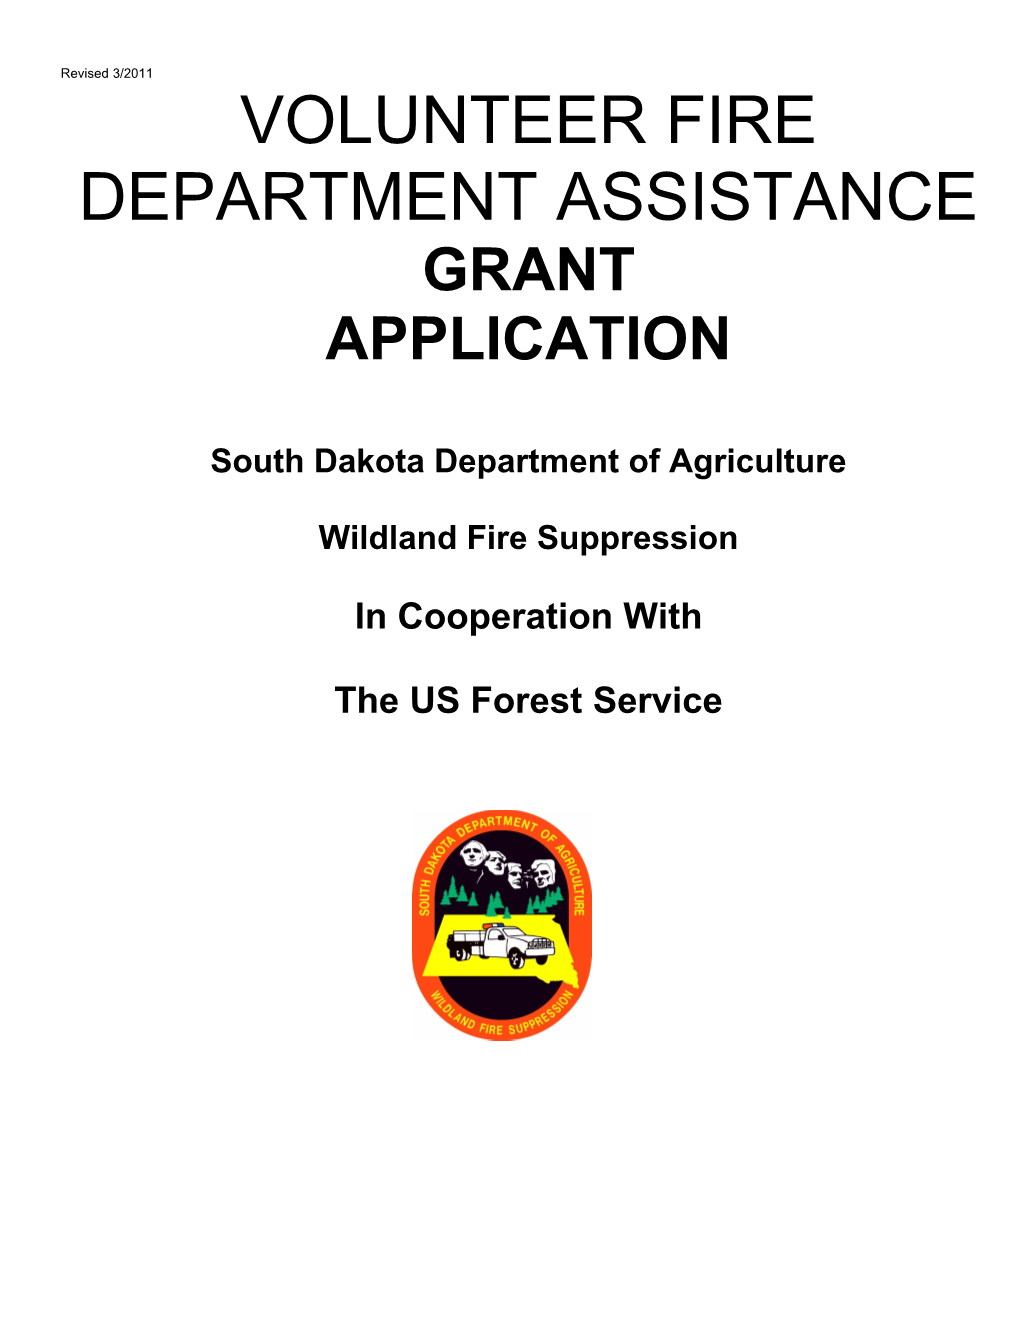 South Dakota Department of Agriculture